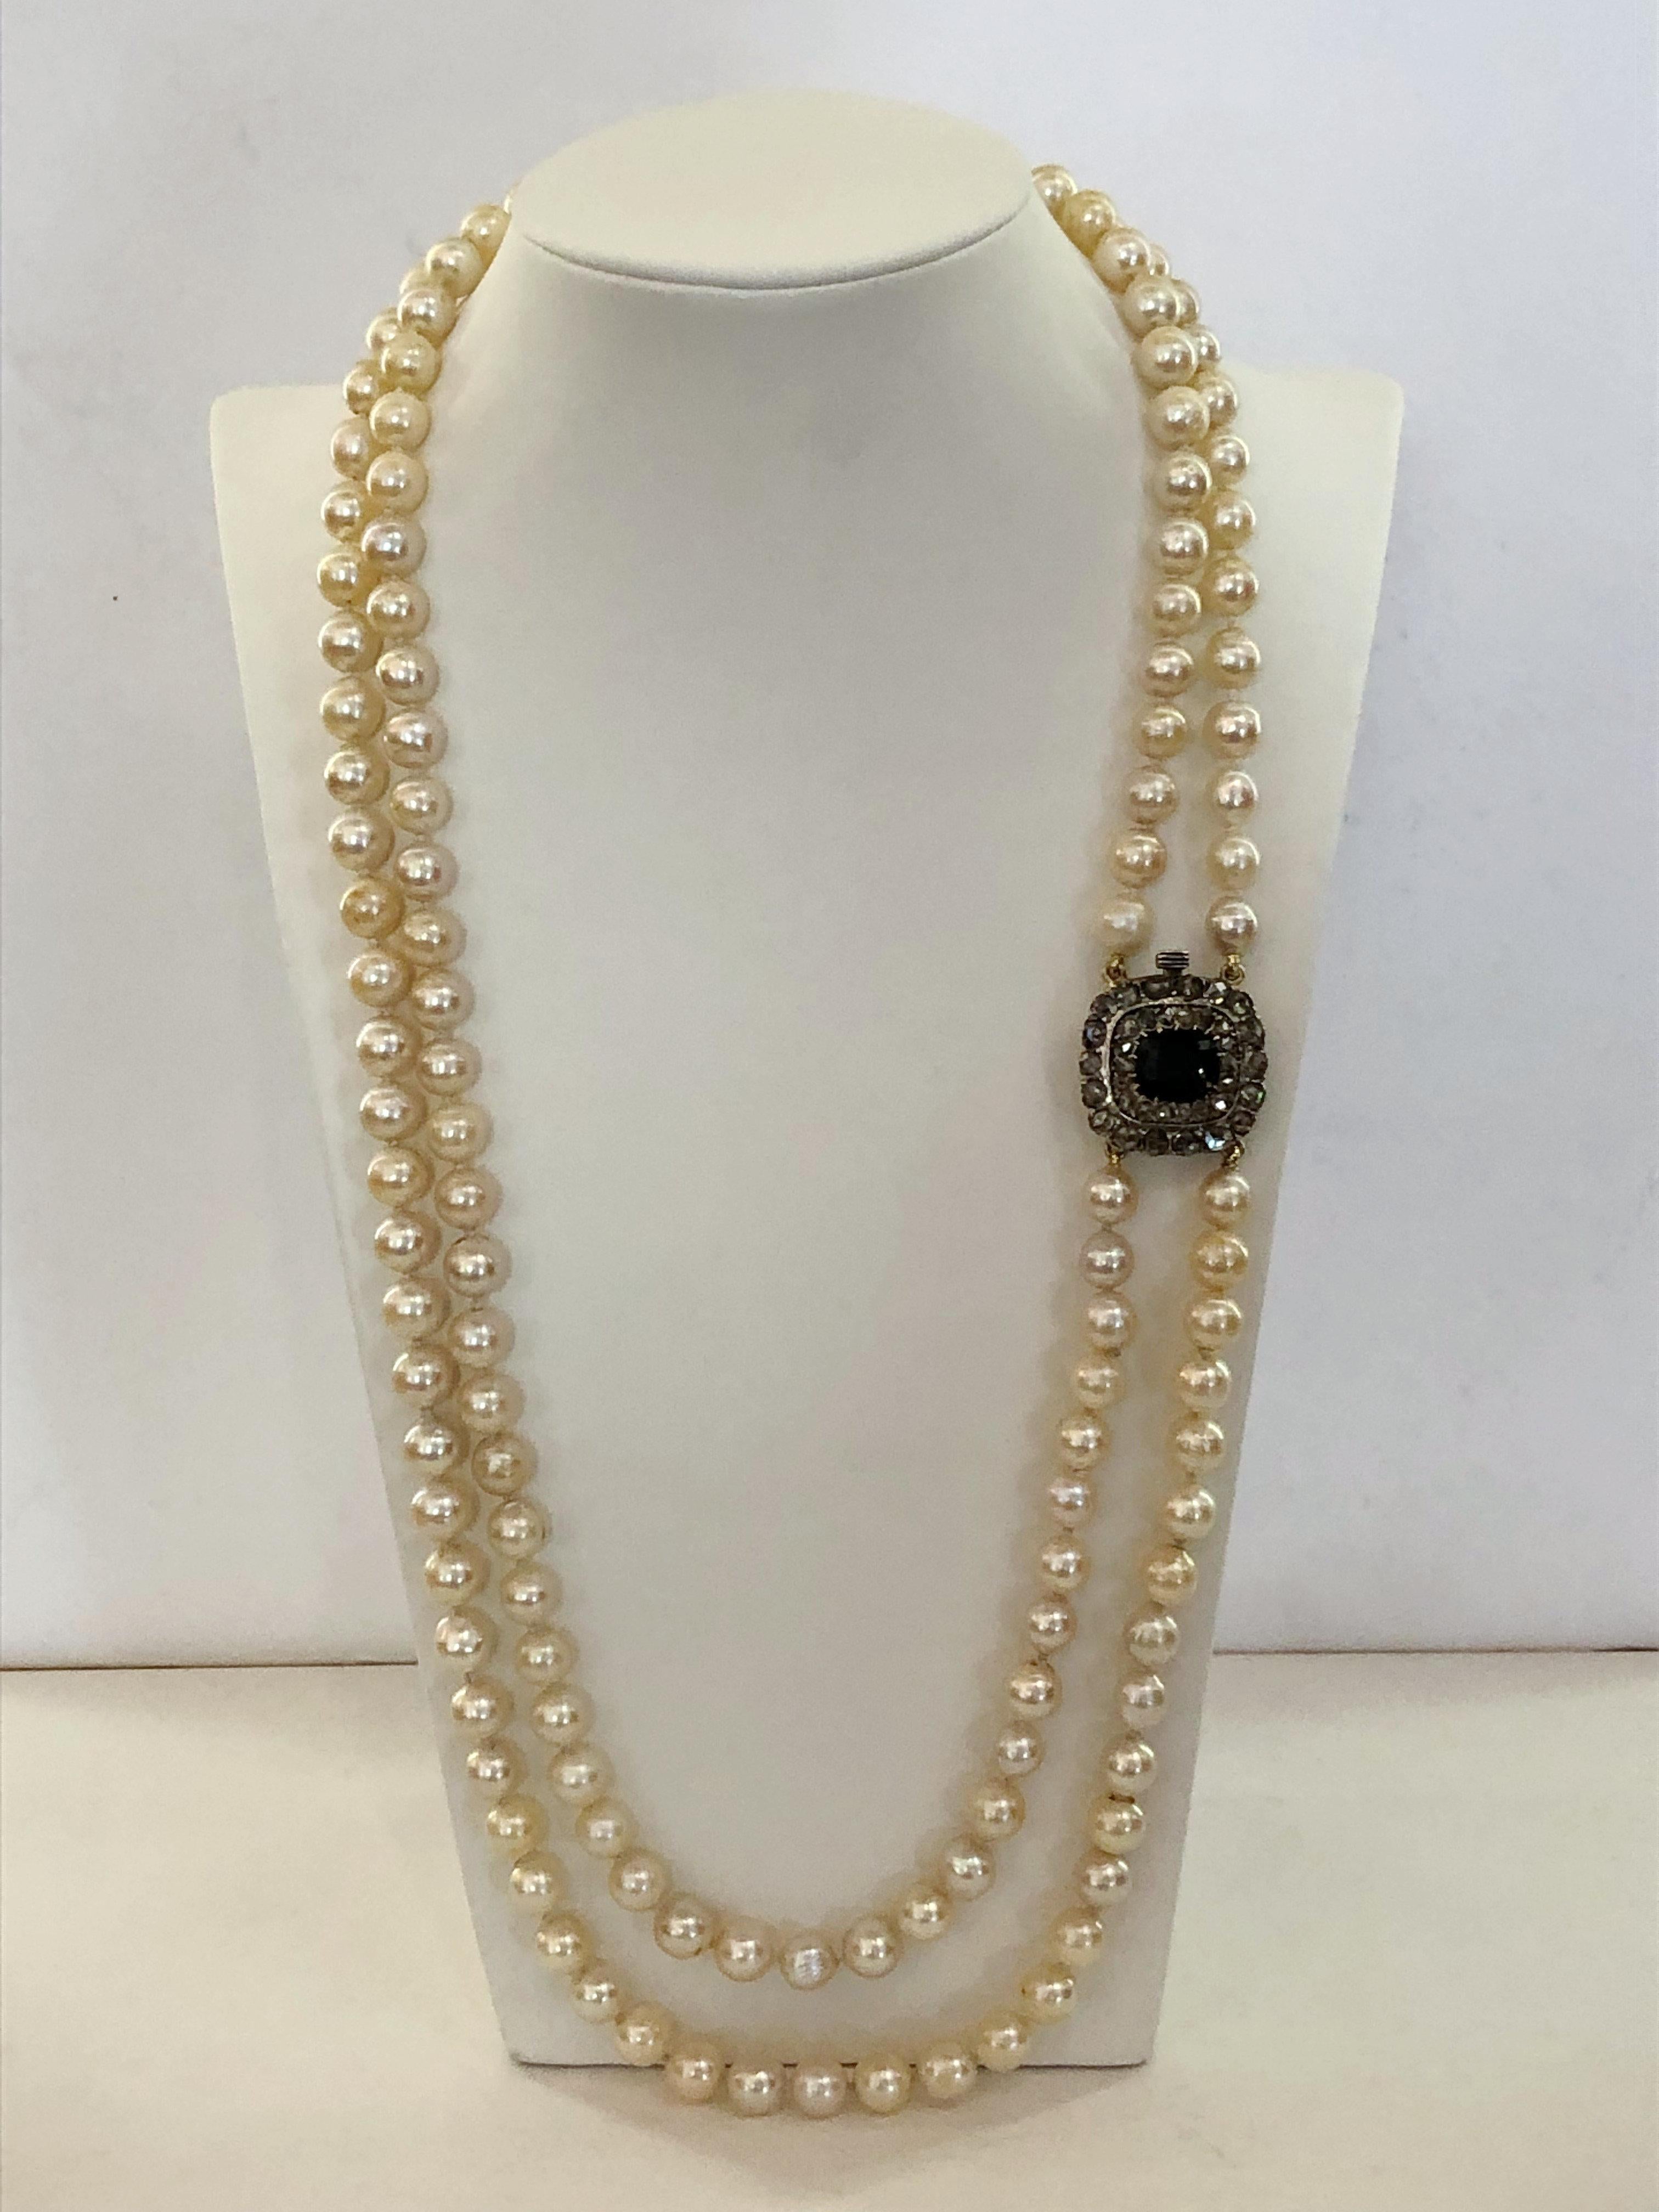 Vintage necklace with double strands of Japanese 7.5mm pearls, and 18 karat gold clasp with double strands of pink cut diamonds and a central sapphire, Italy 1950s-1960s
Length 59 cm